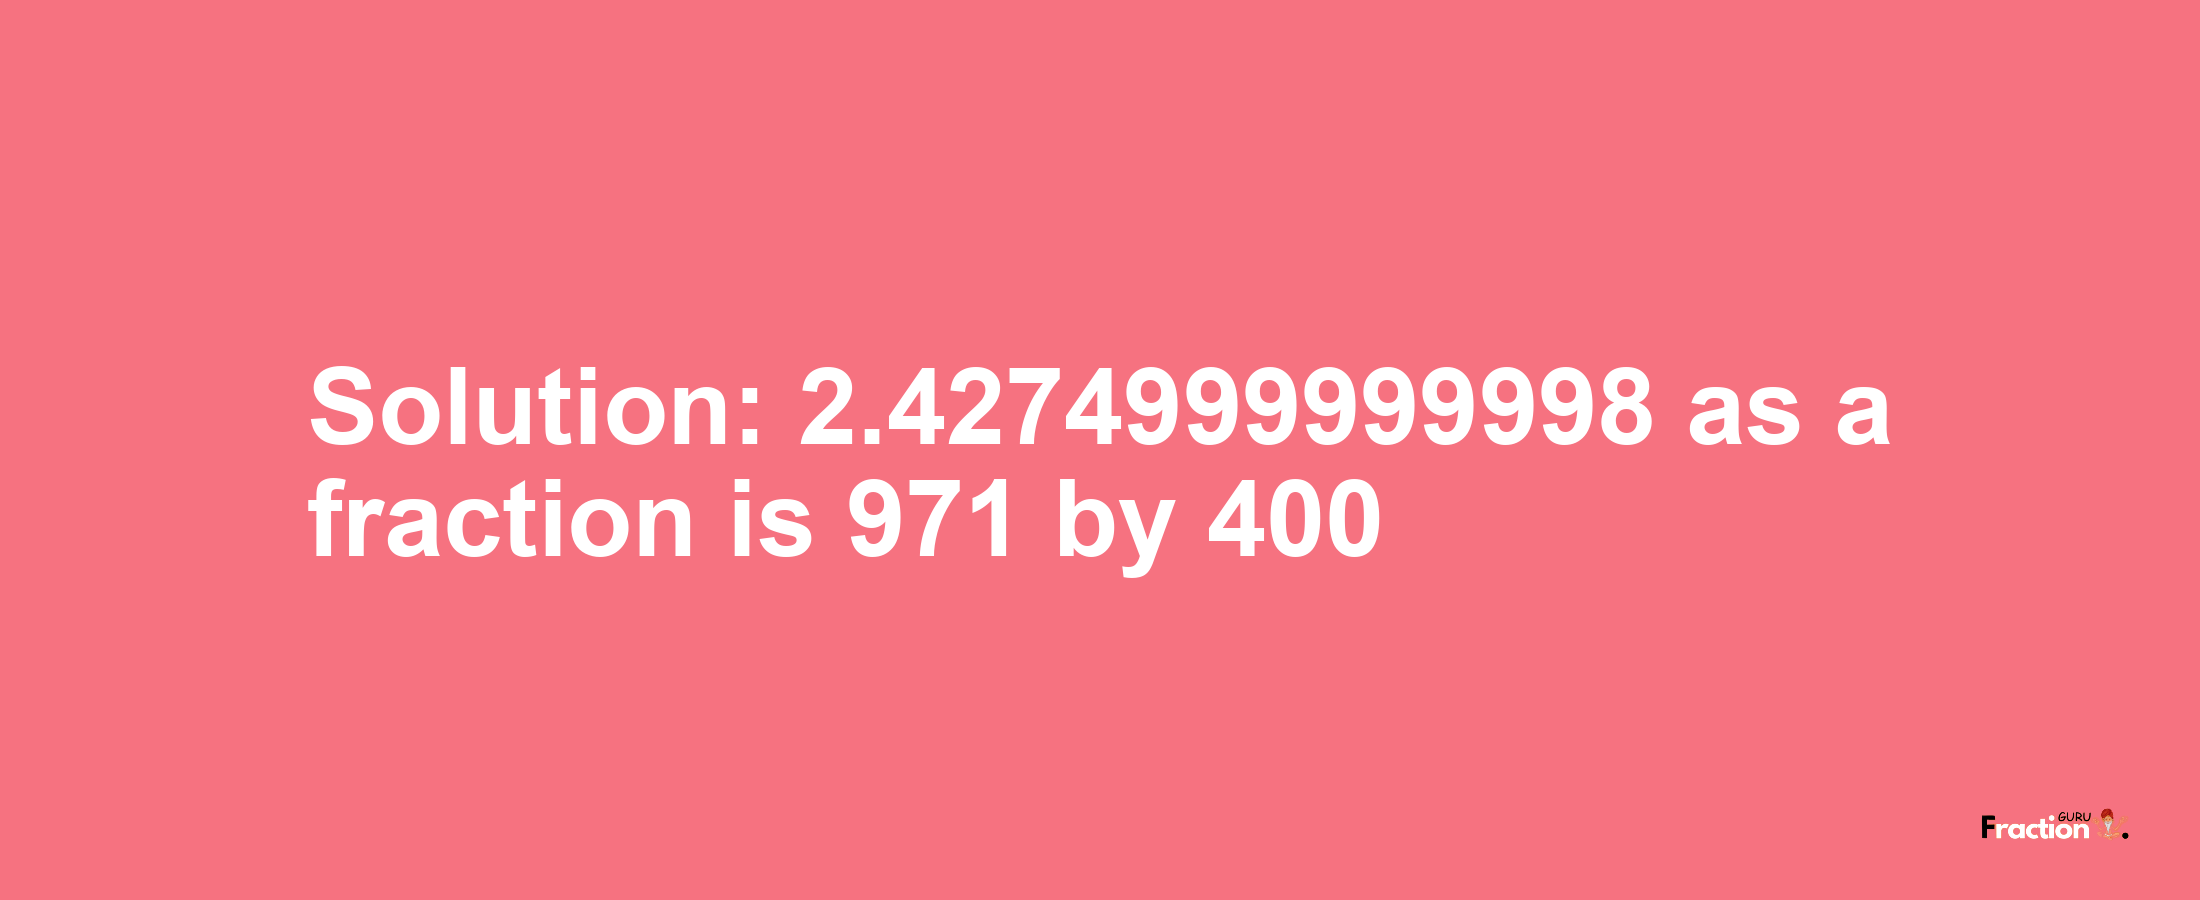 Solution:2.4274999999998 as a fraction is 971/400